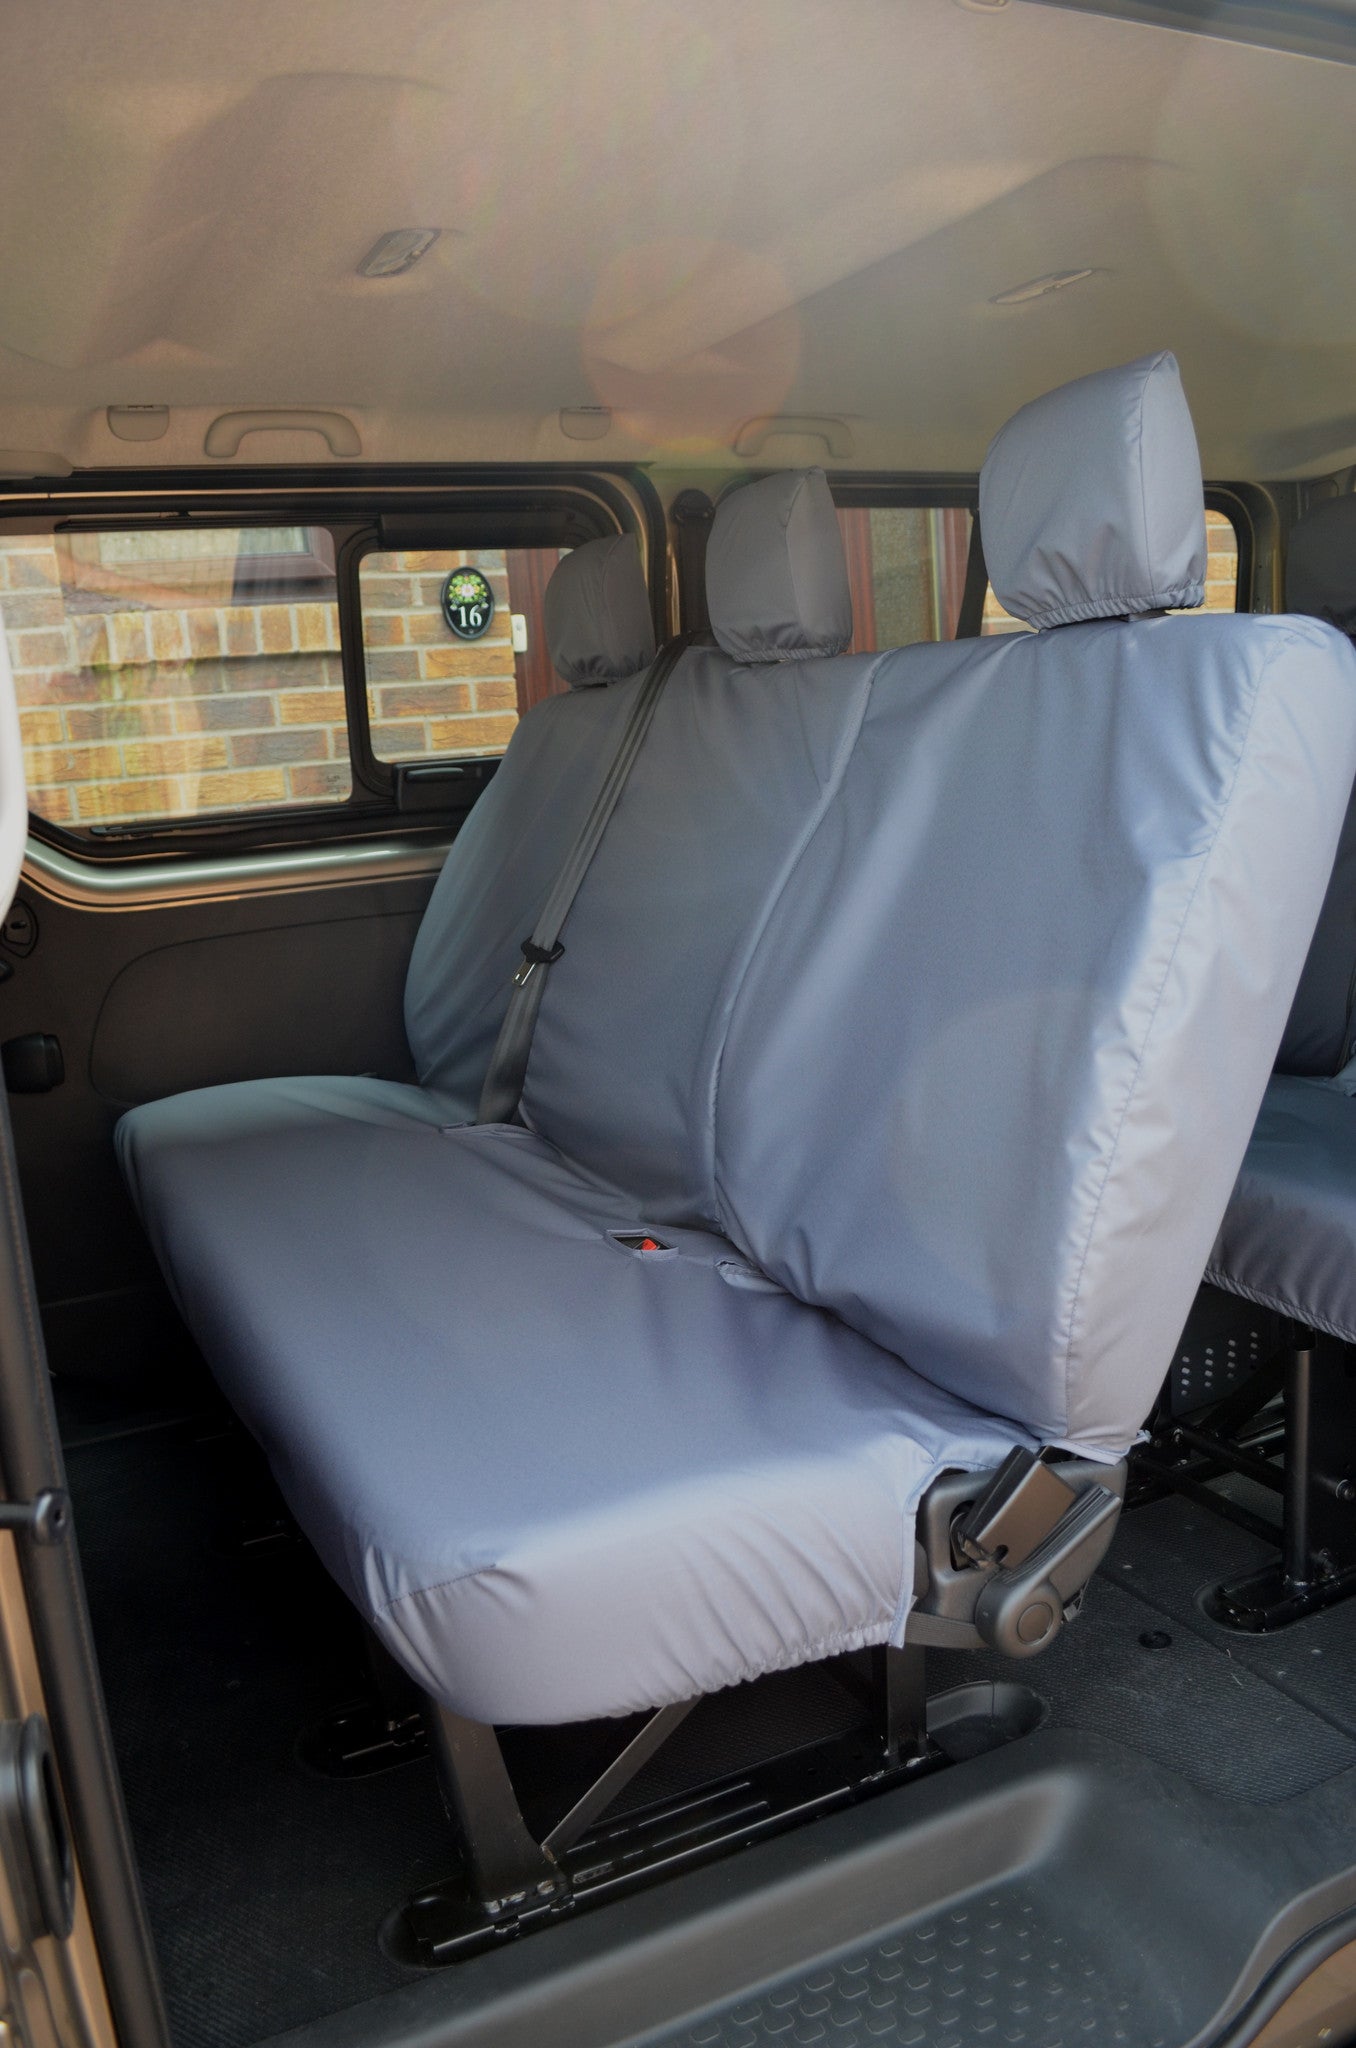 Renault Trafic Passenger 2001 - 2006 Seat Covers  Turtle Covers Ltd